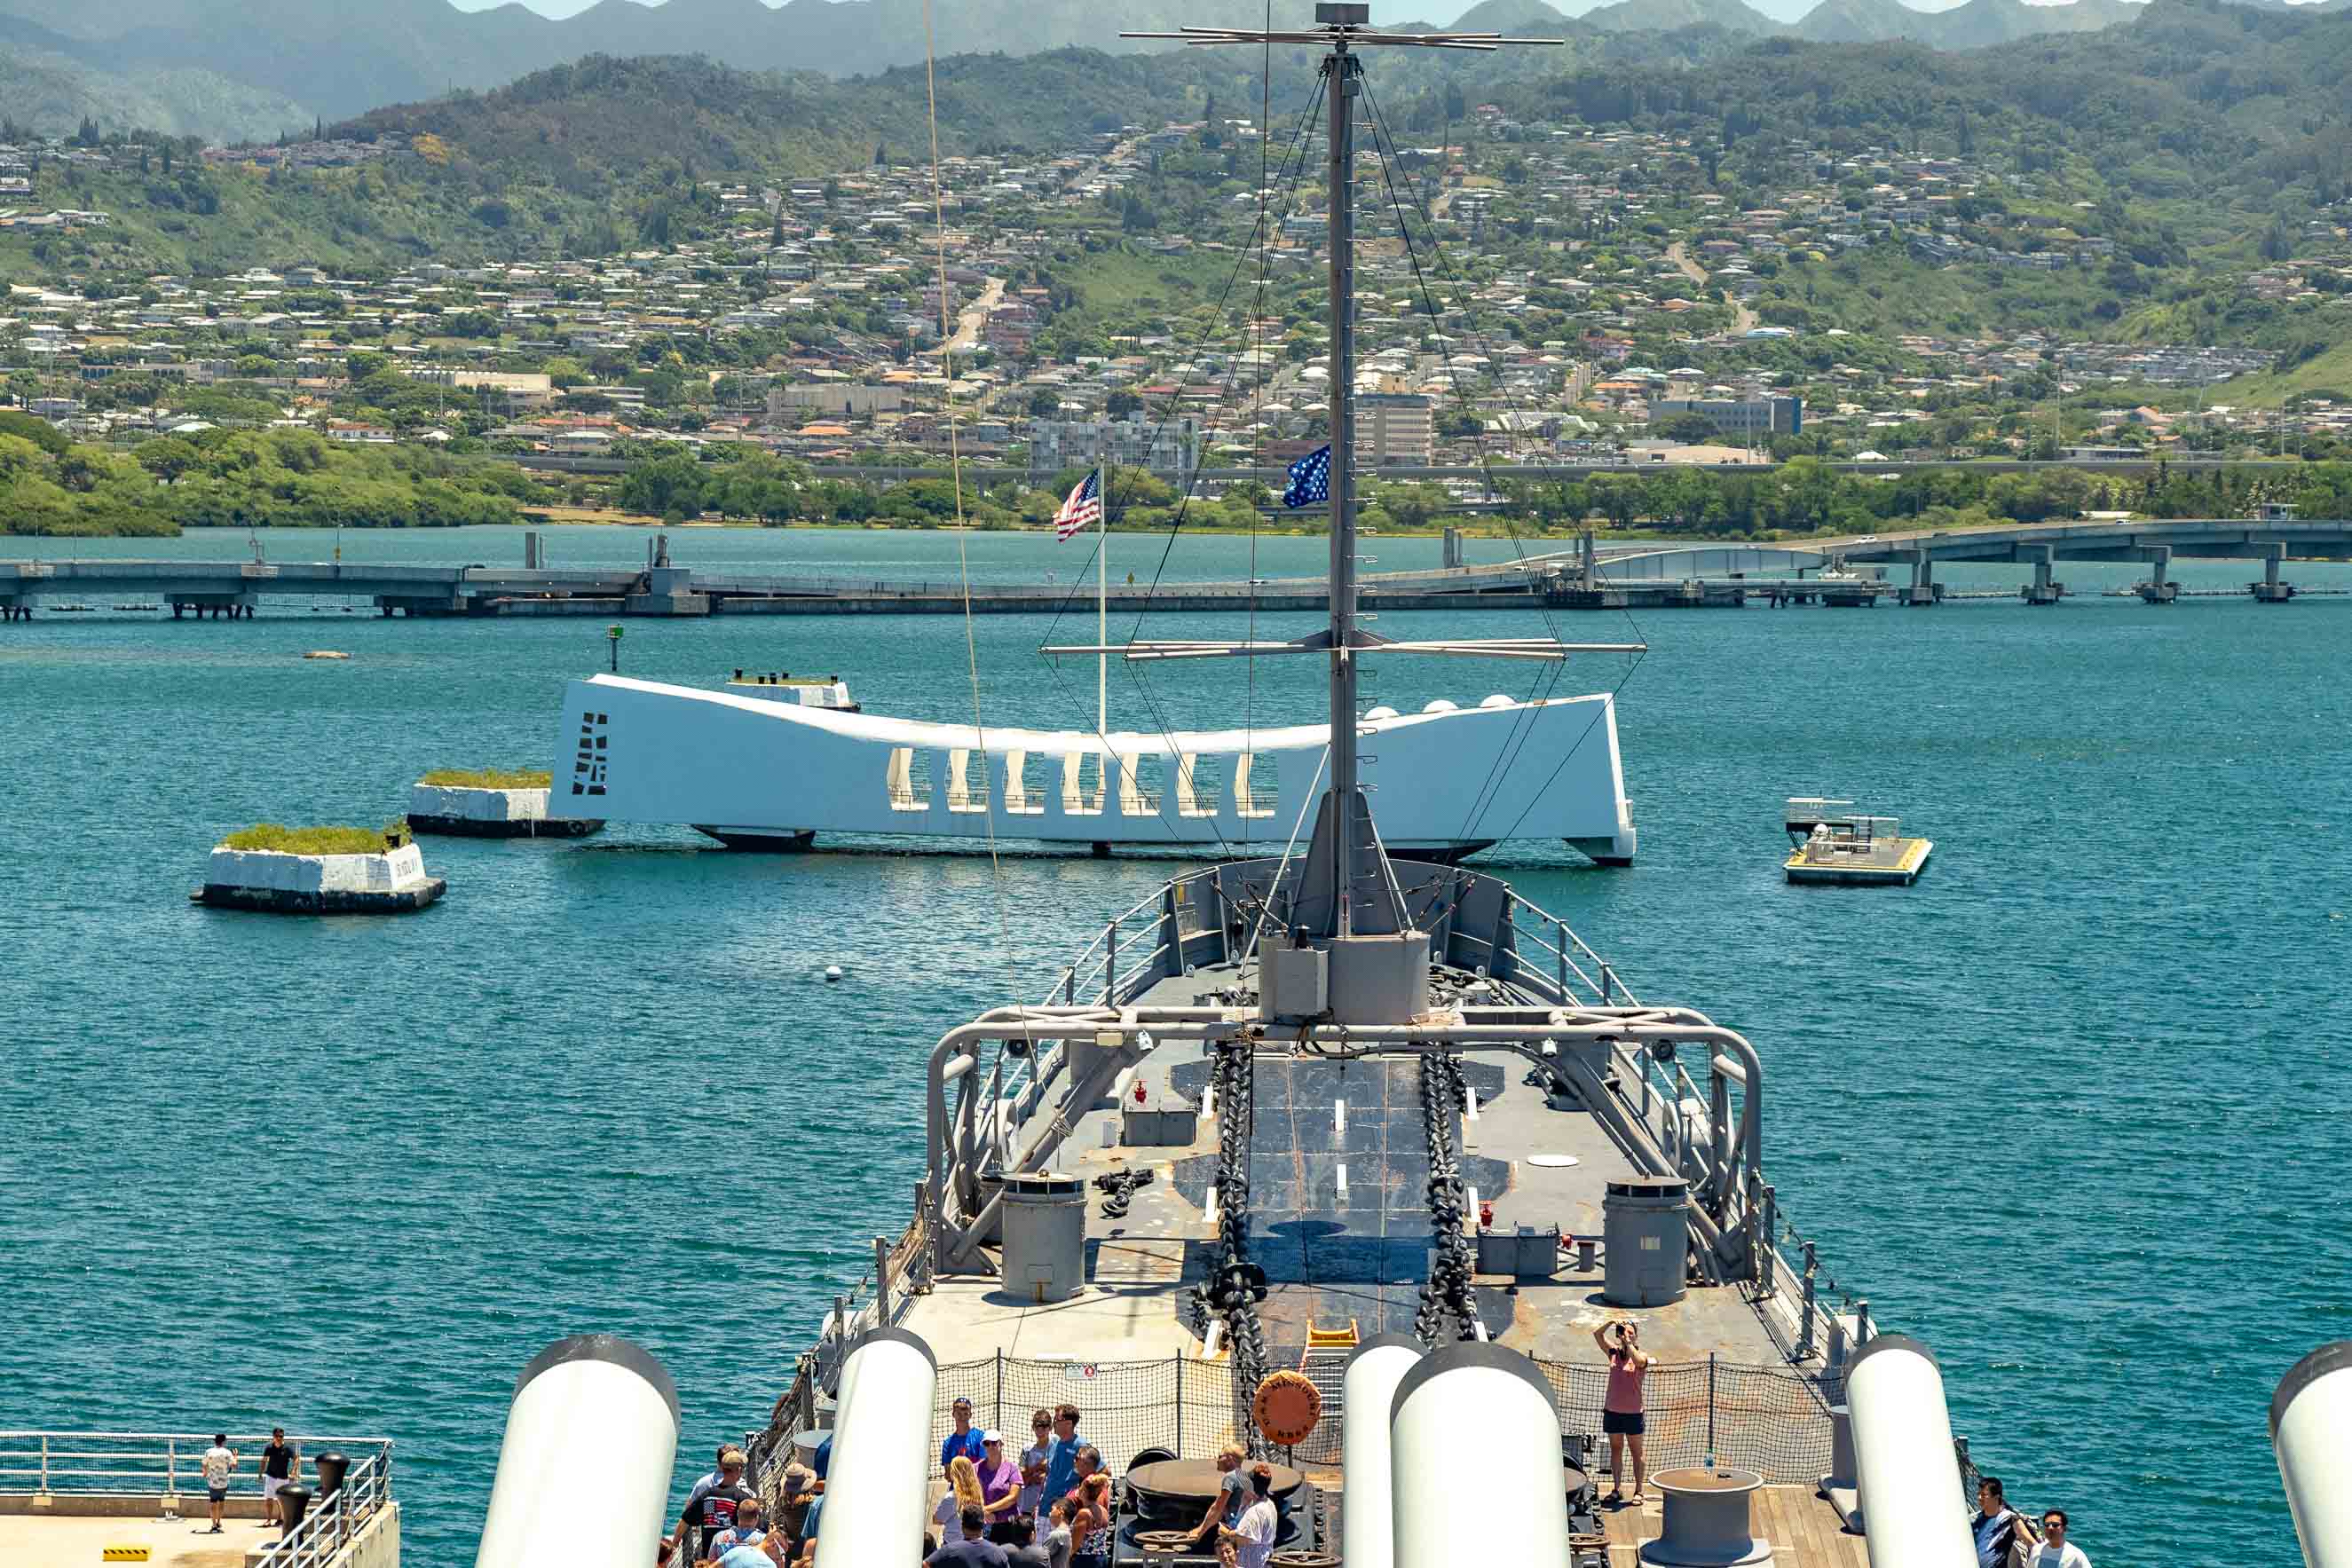 tours from big island to pearl harbor